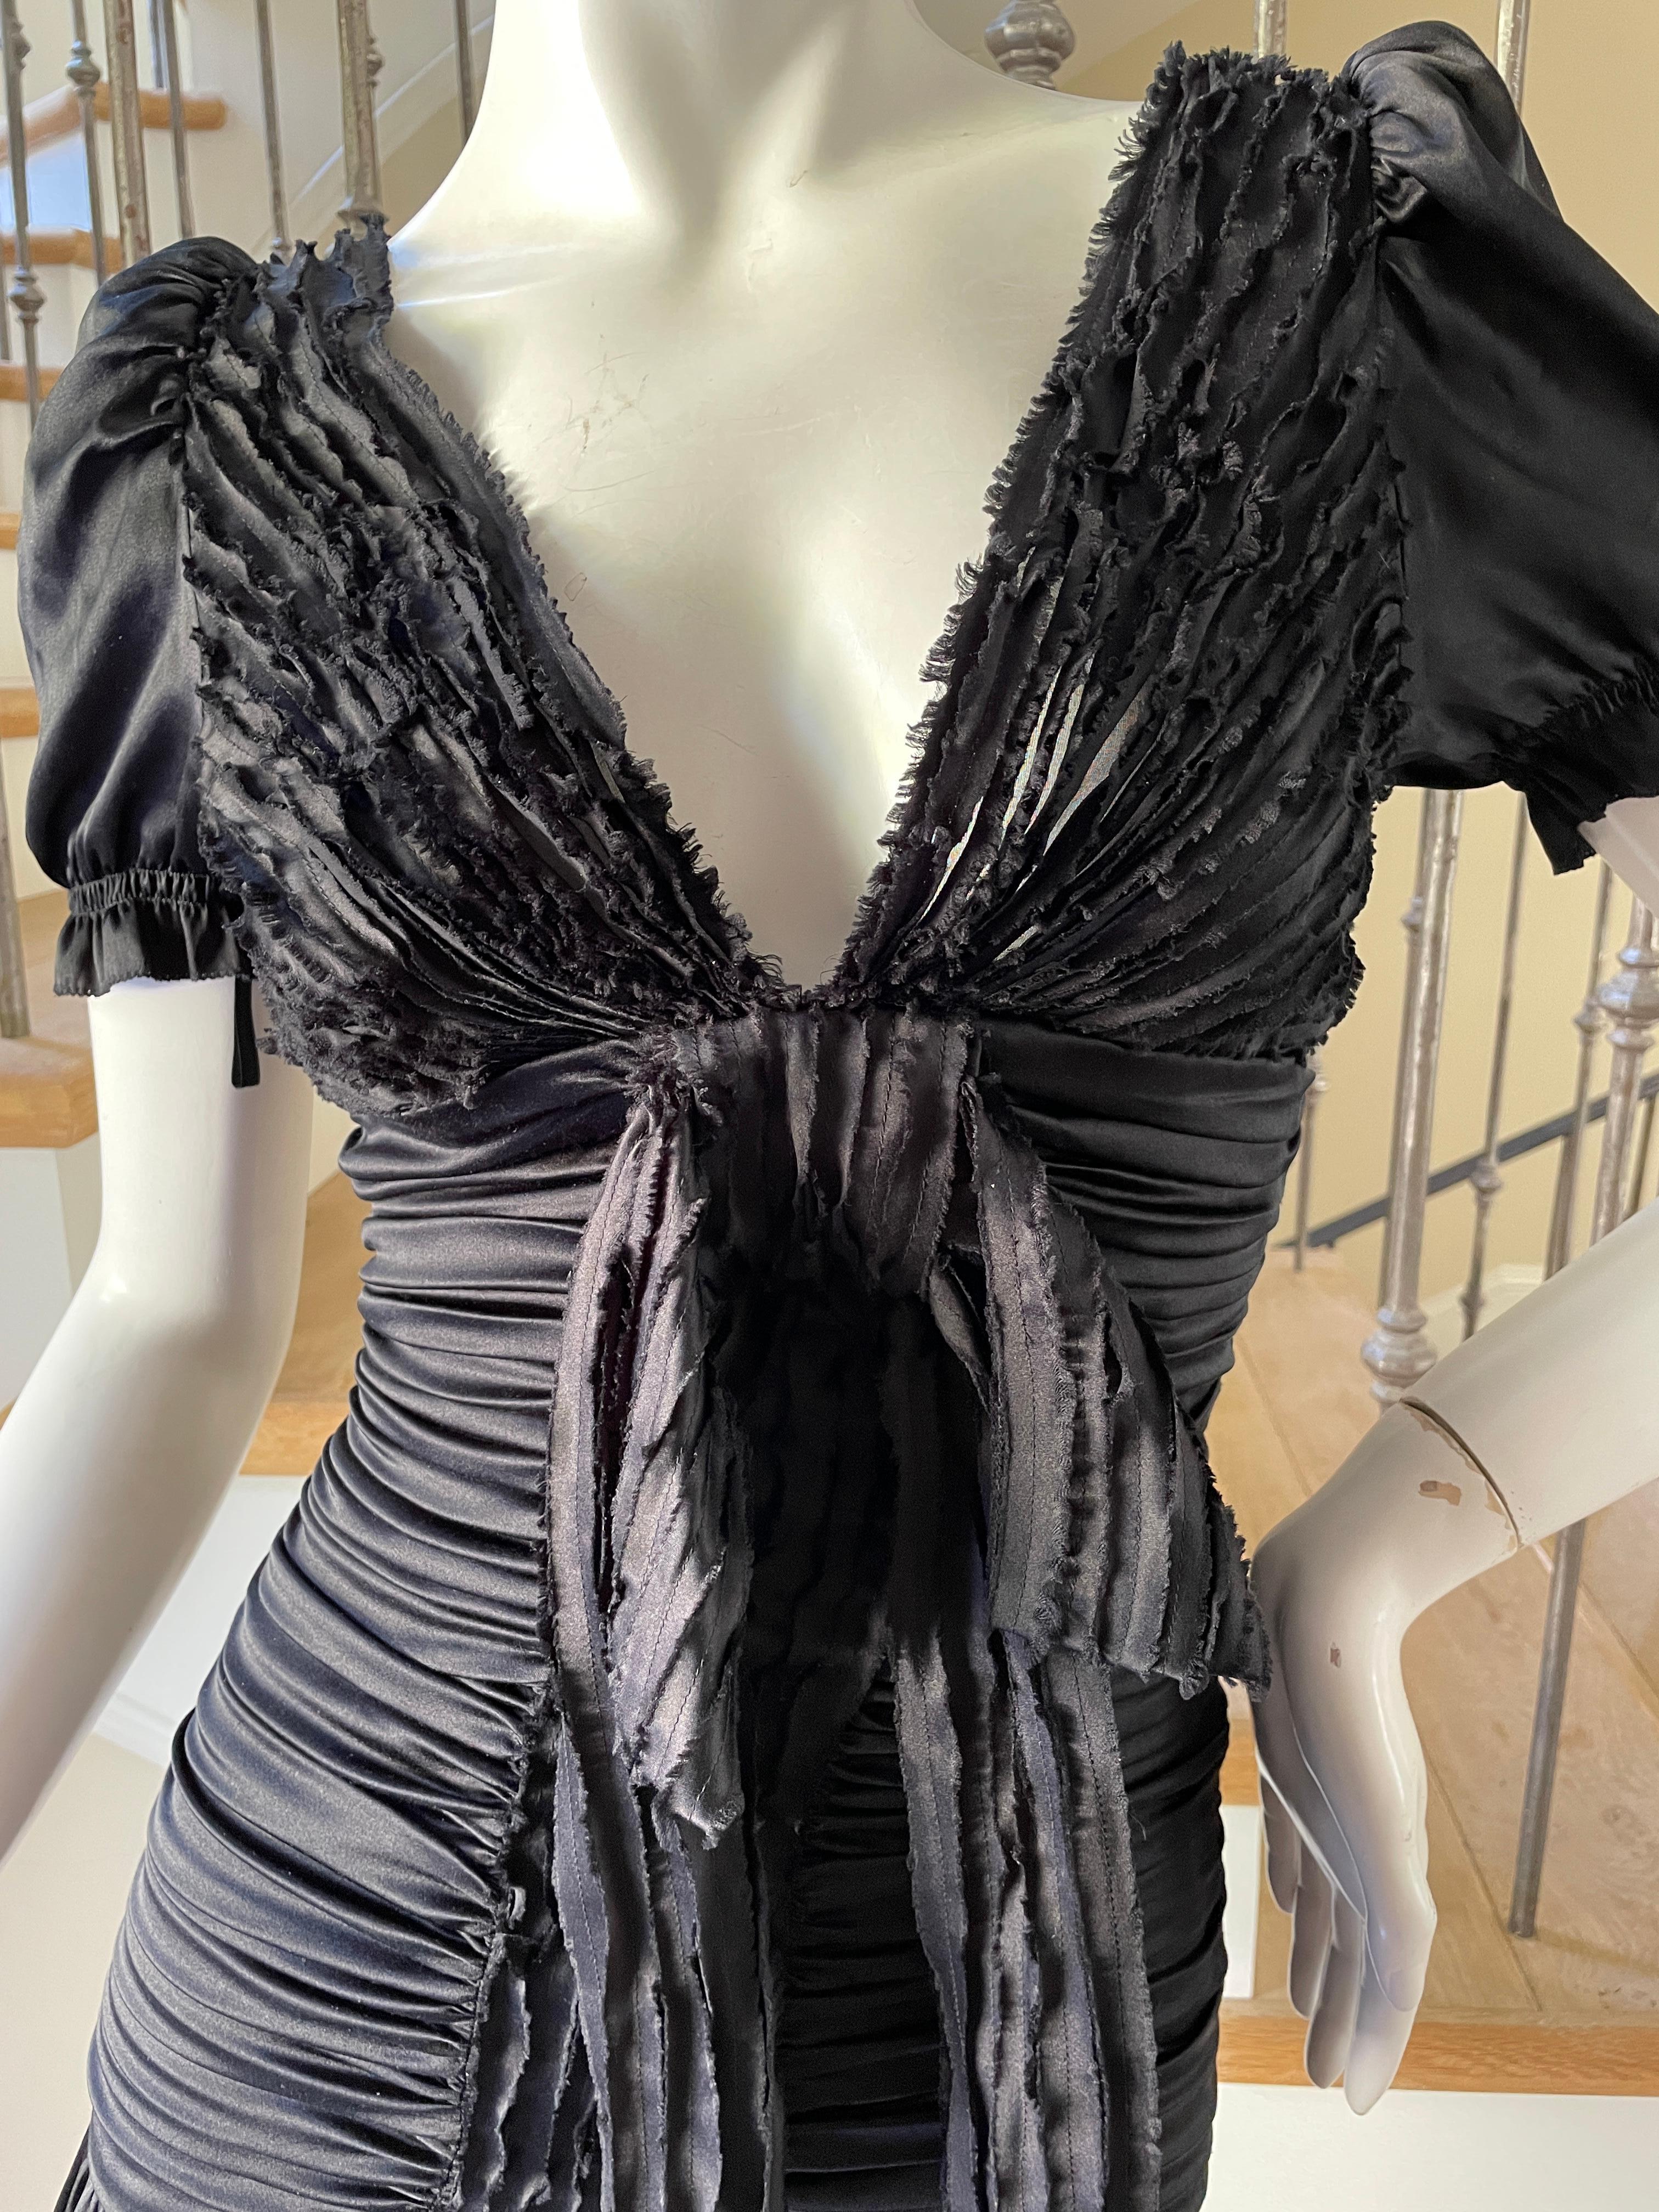 D&G by Dolce & Gabbana Vintage Black Silk Pleated Plunging Mini Dress In Excellent Condition For Sale In Cloverdale, CA